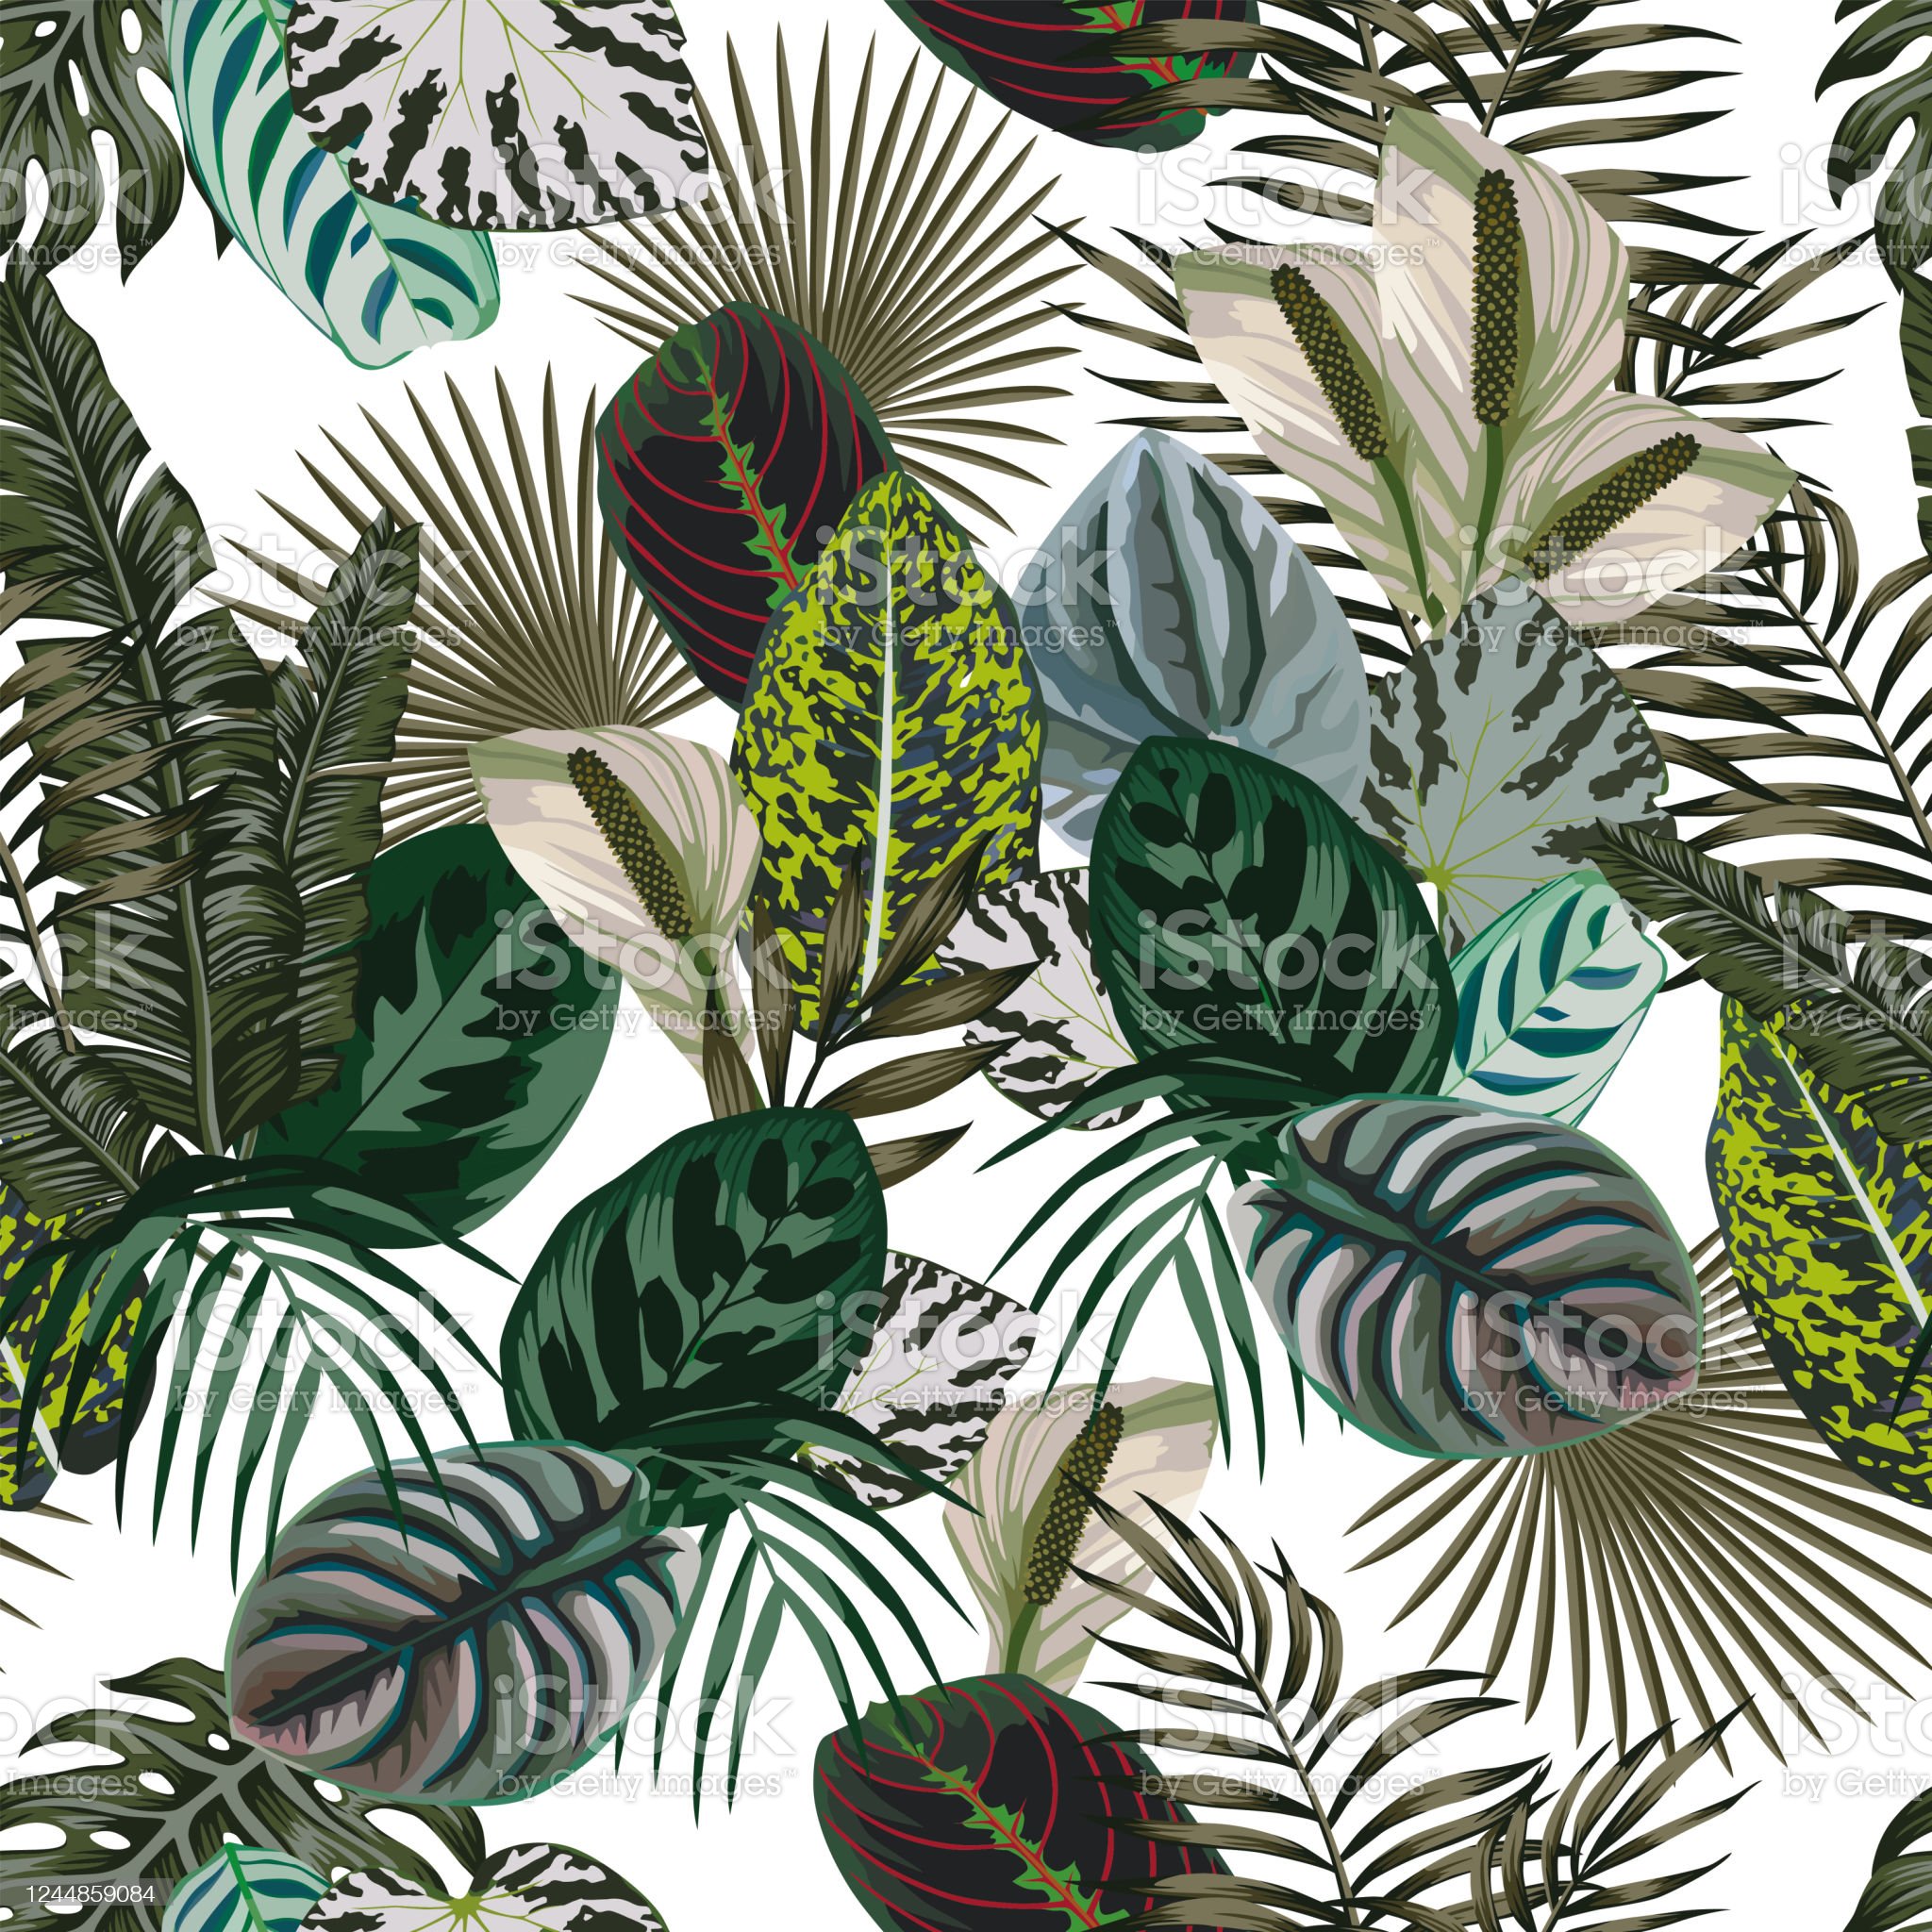 Jungle Leaves Flowers Dark Color Seamless Background Stock Illustration Image Now